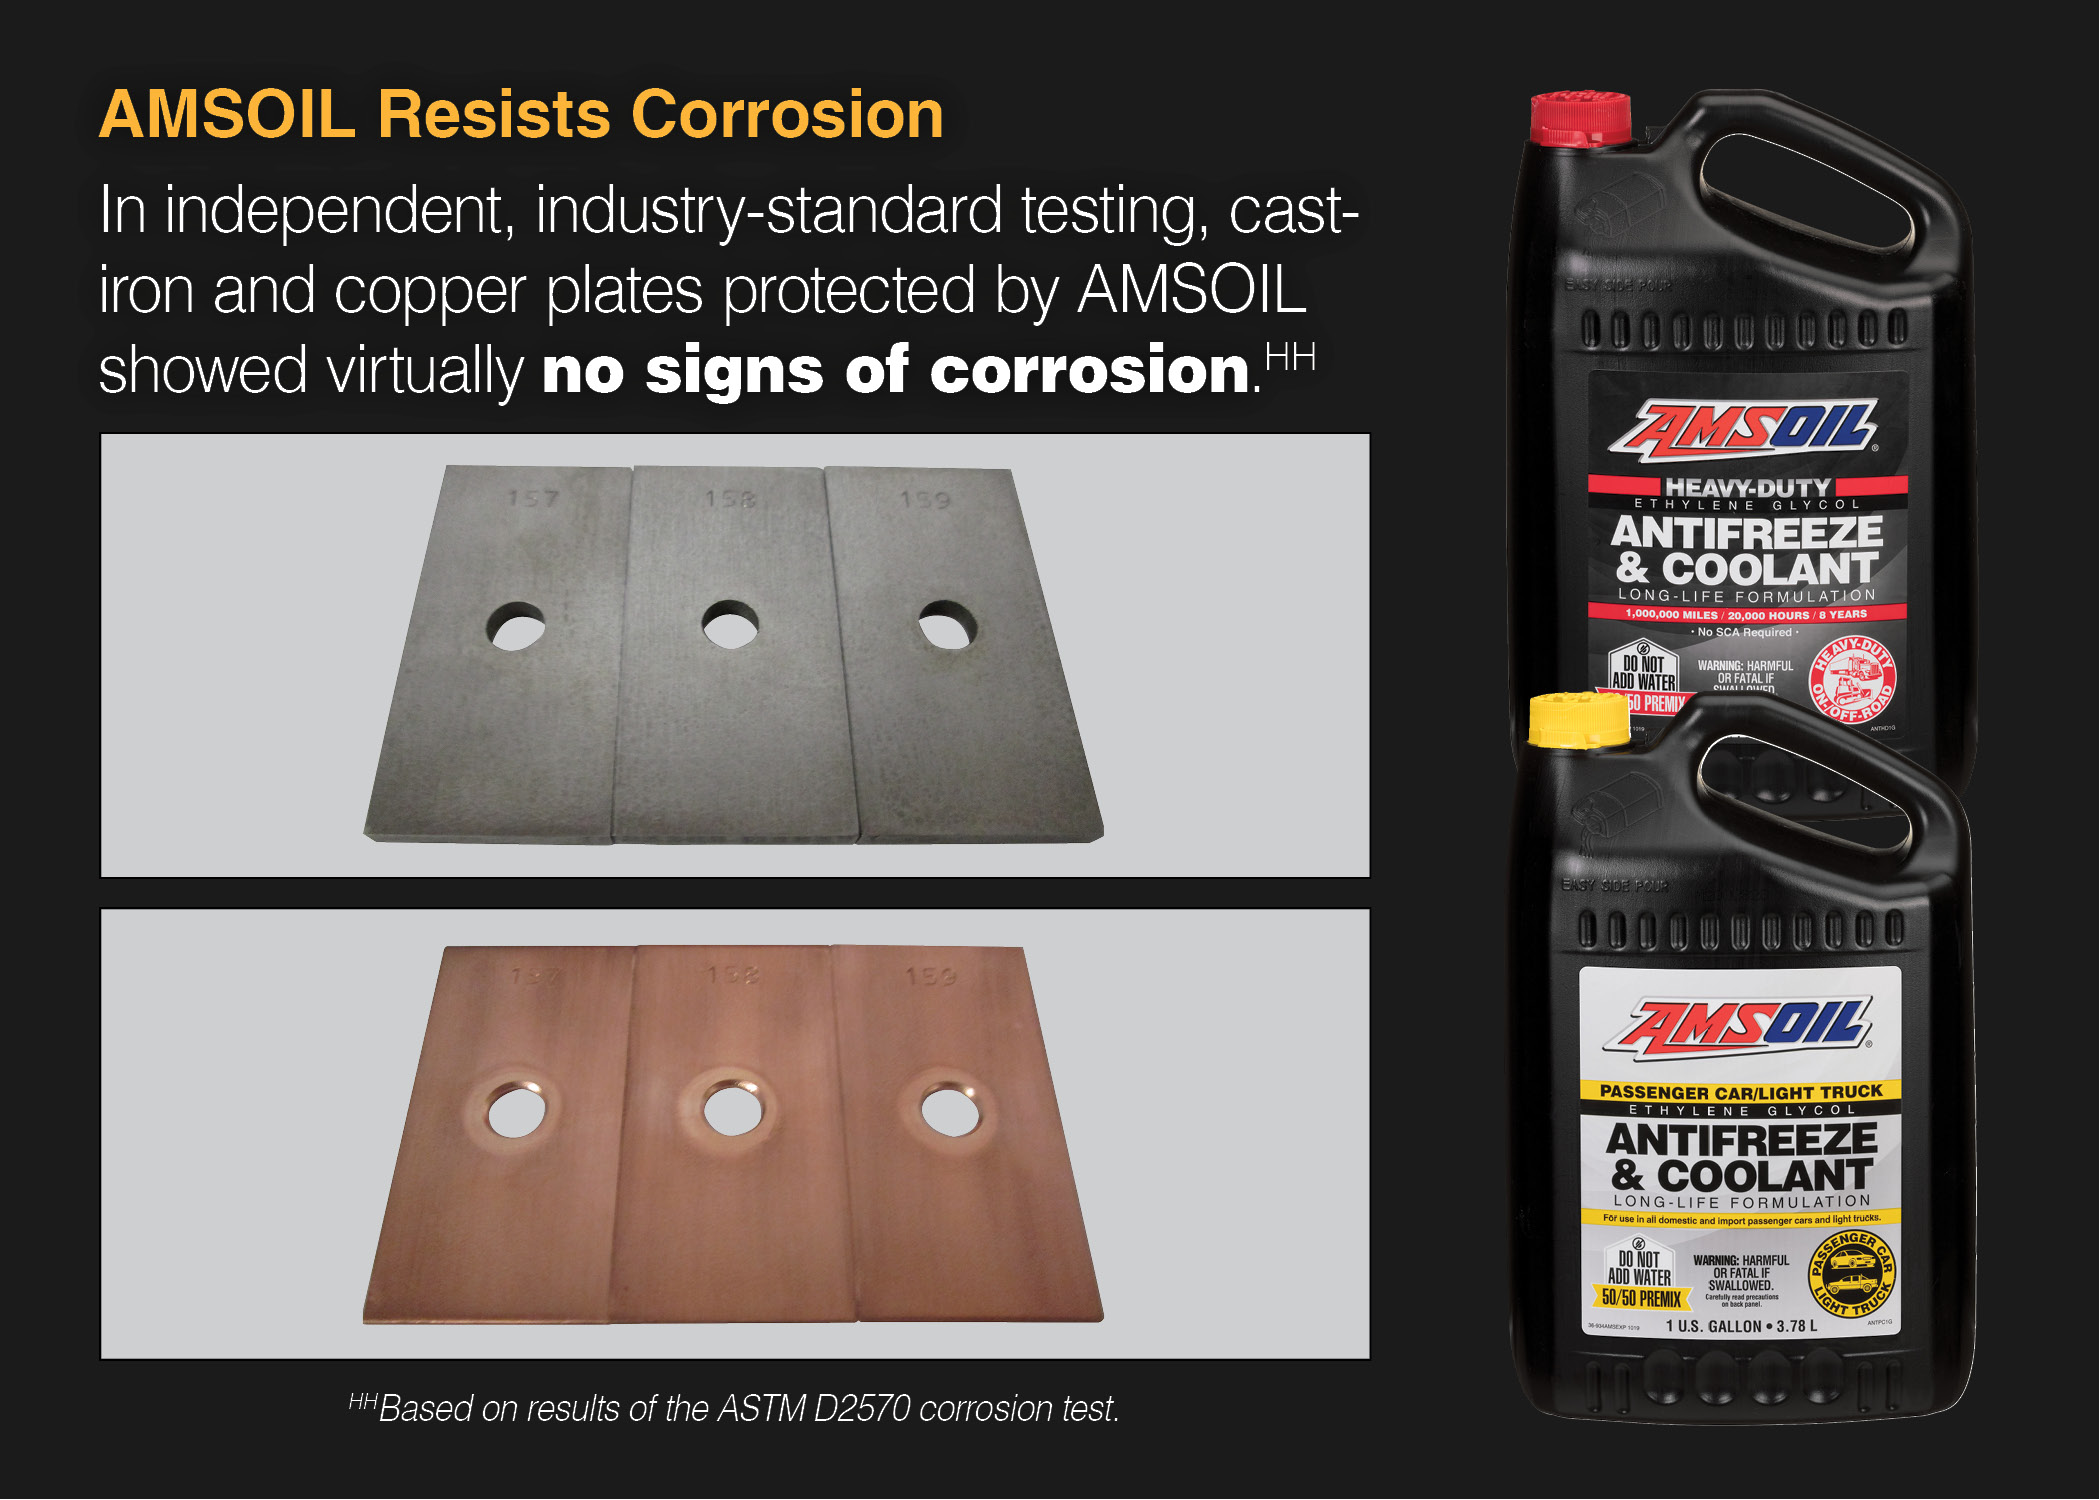 AMSOIL Antifreeze and Coolant prevents corrosion